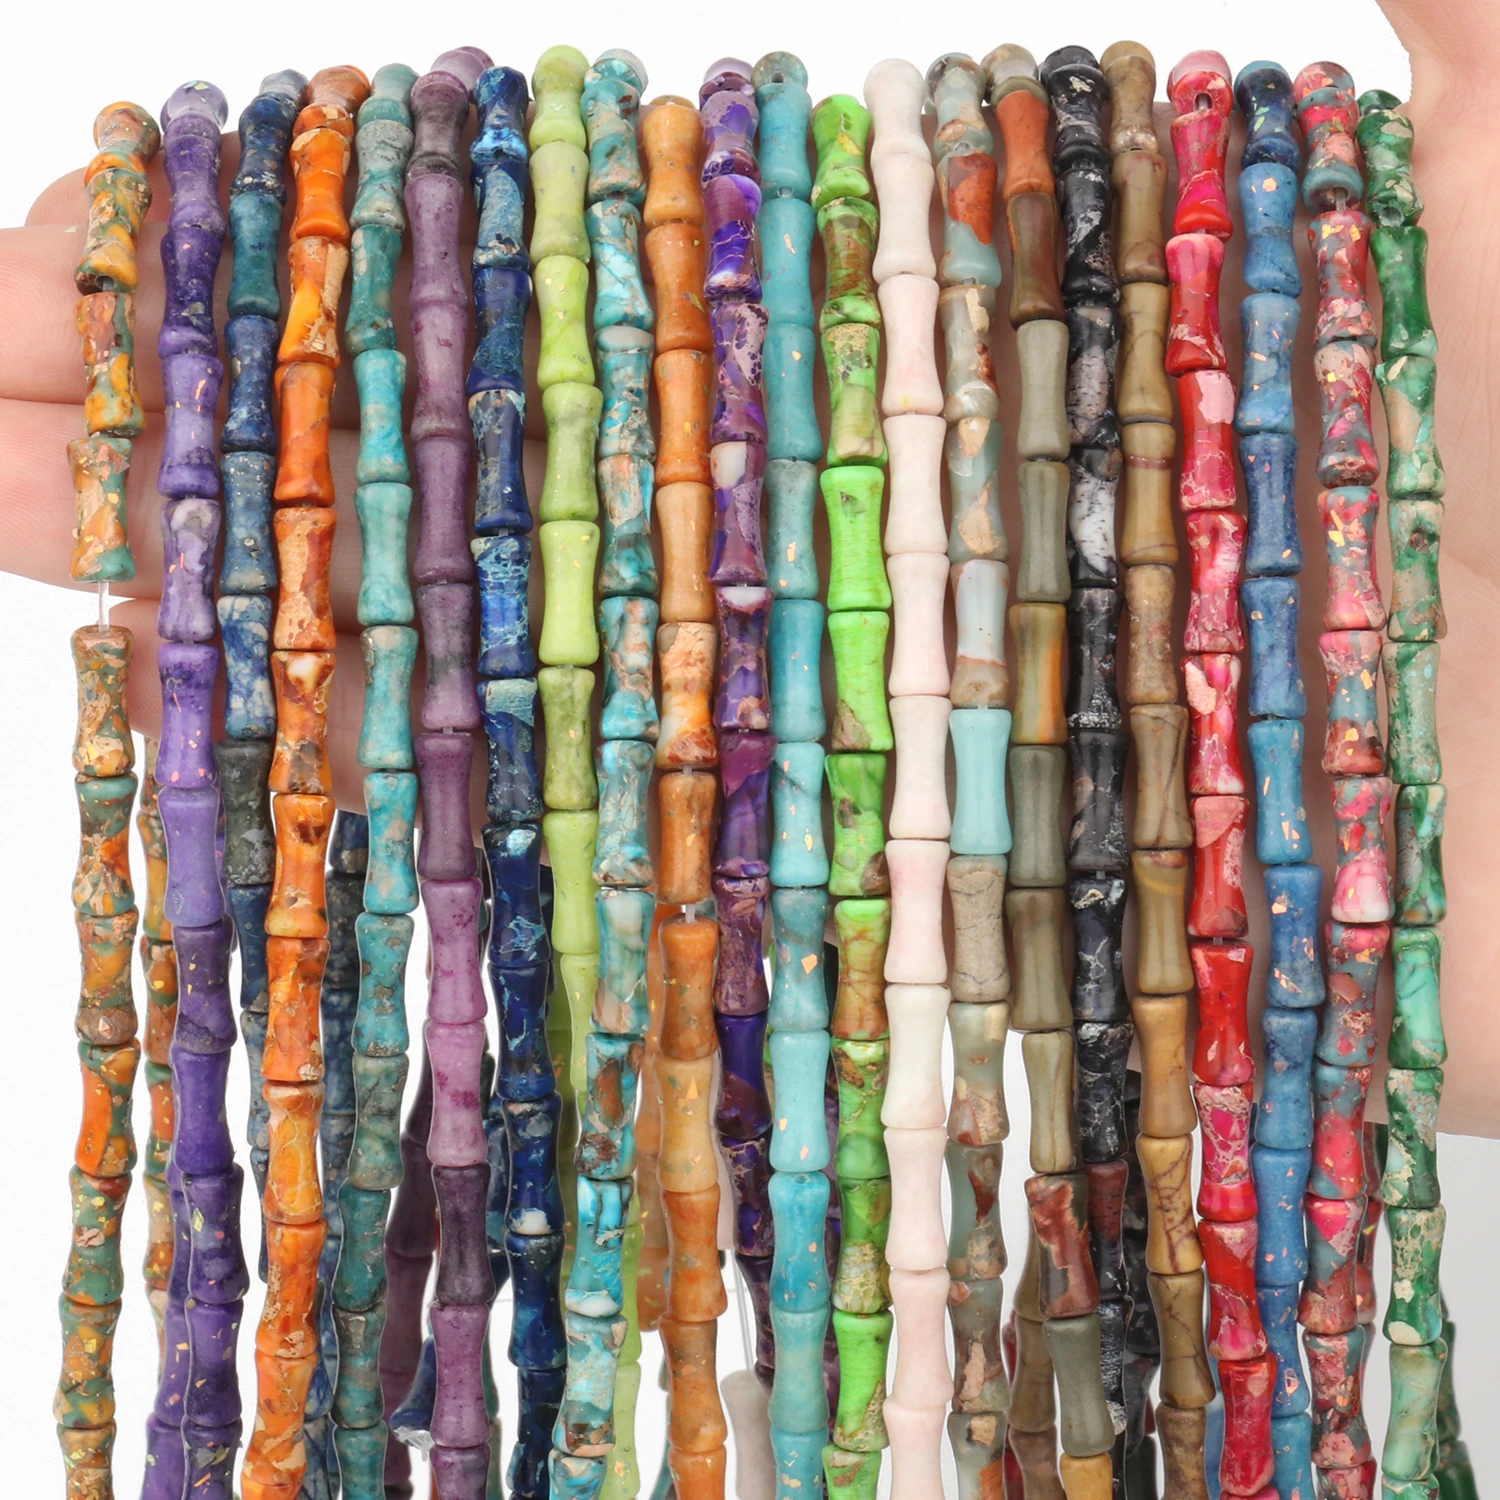 

12x5mm Colorful Bamboo Joint Shape Natural Sea Sediment Stone Beads Diy Bracelet Spacer Beads for For Jewelry Findings Crafts